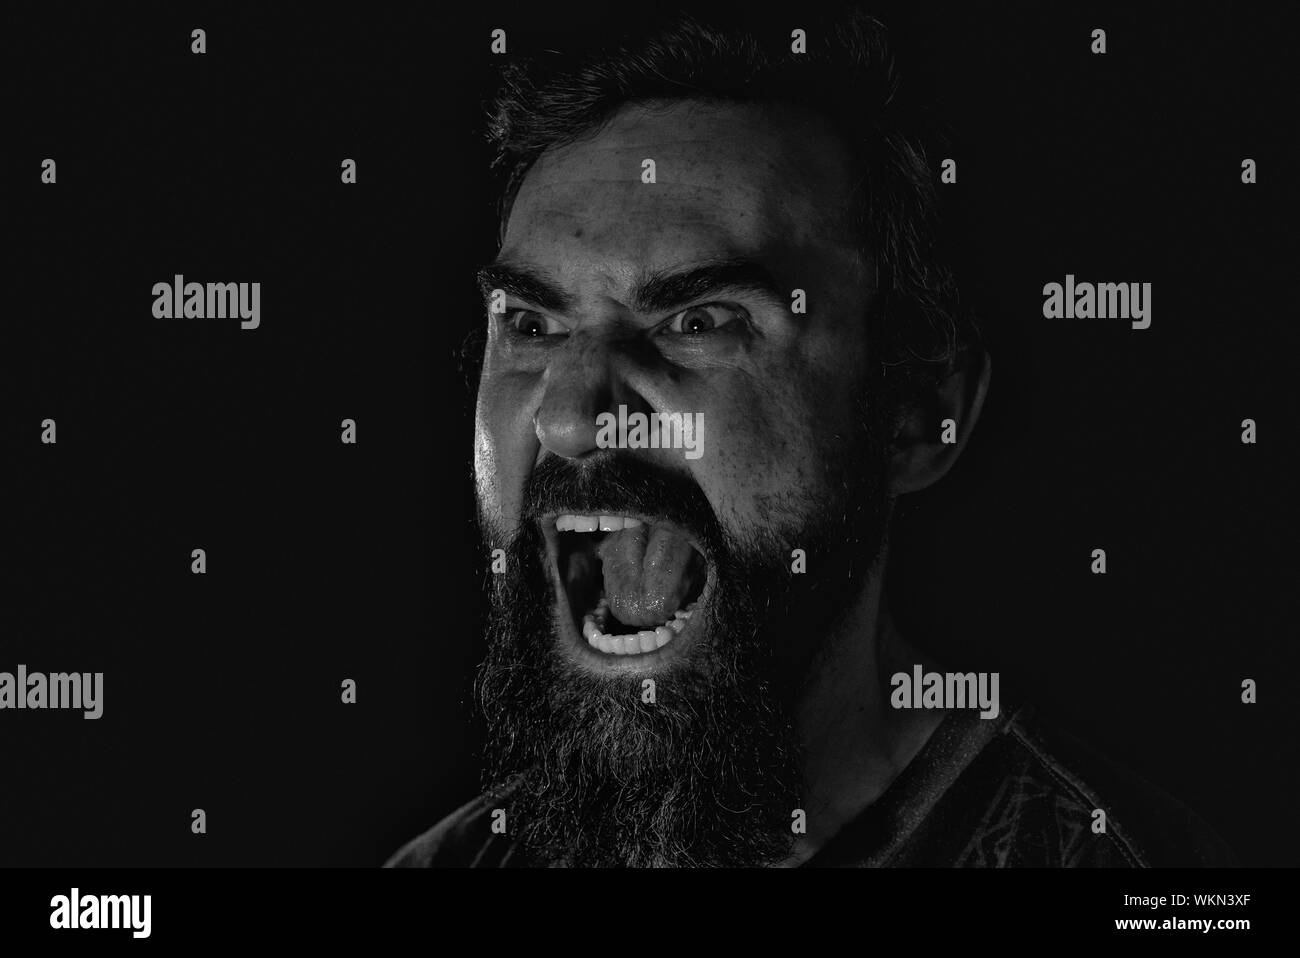 Close-up Of Angry Man Shouting Against Black Background Stock Photo